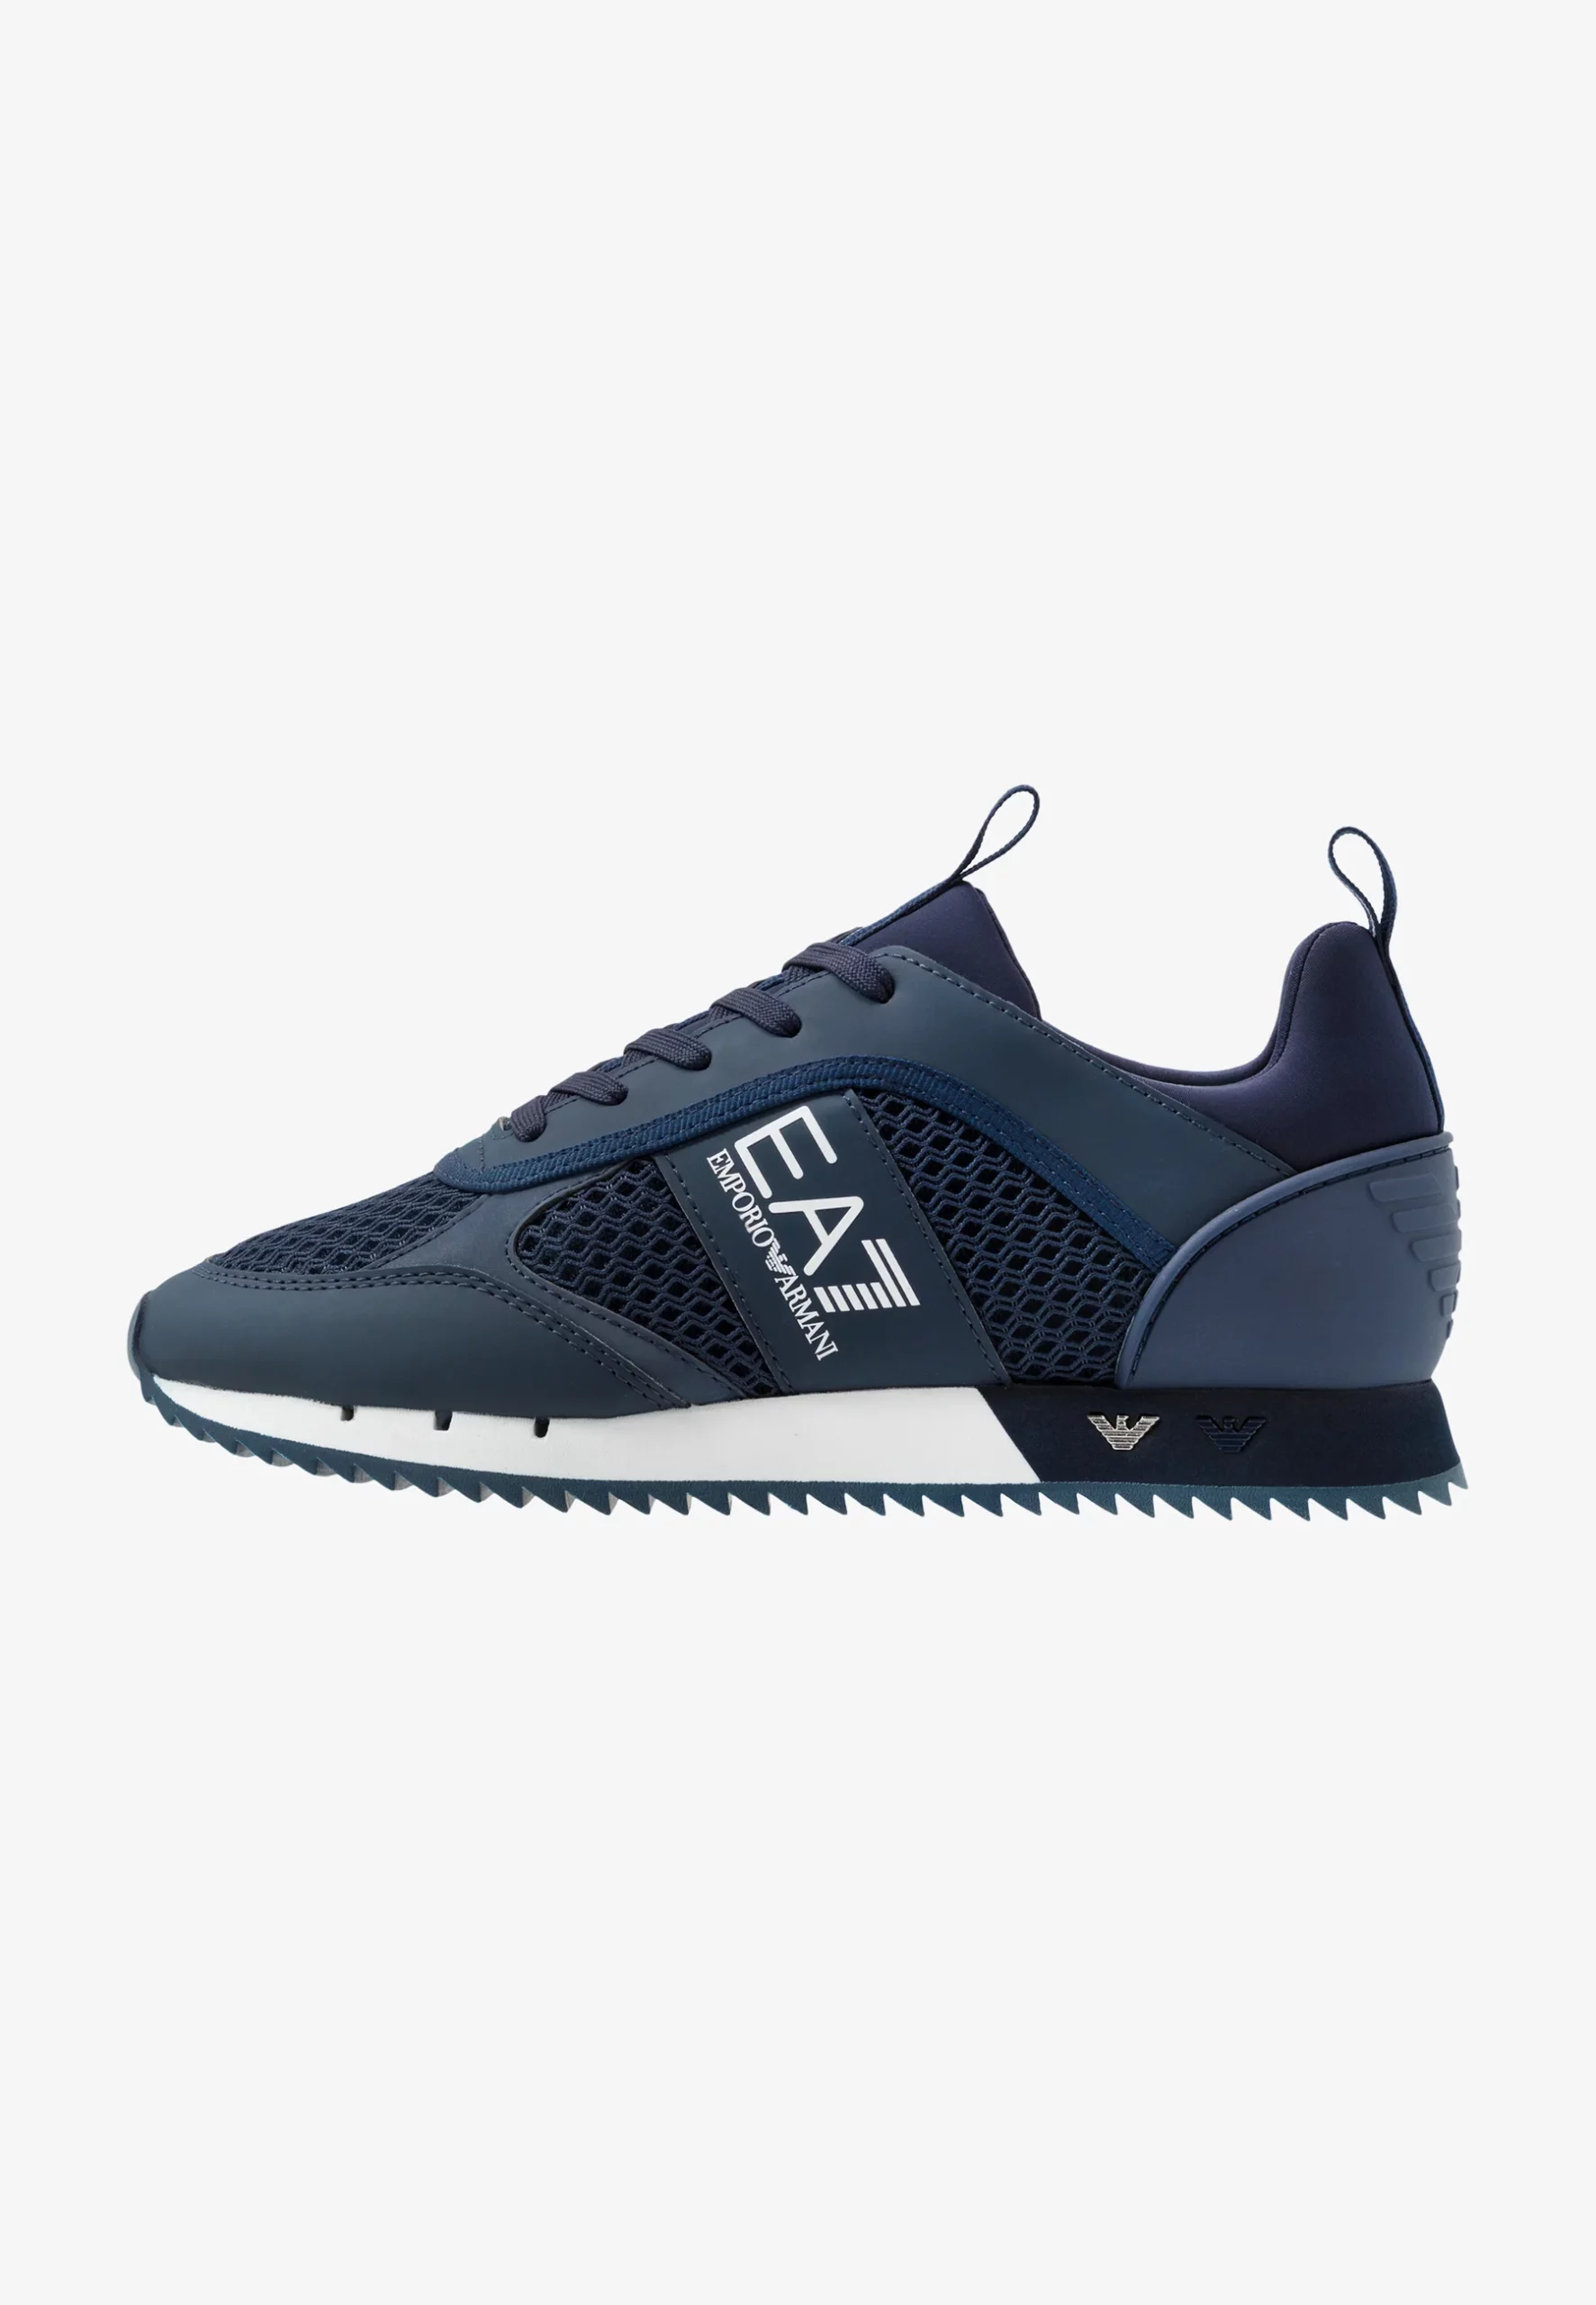 Knipperen Italiaans levering Emporio Armani EA7 Lace Up Sneakers Heren Navy/White shoppen? |  Soccerfanshop BE